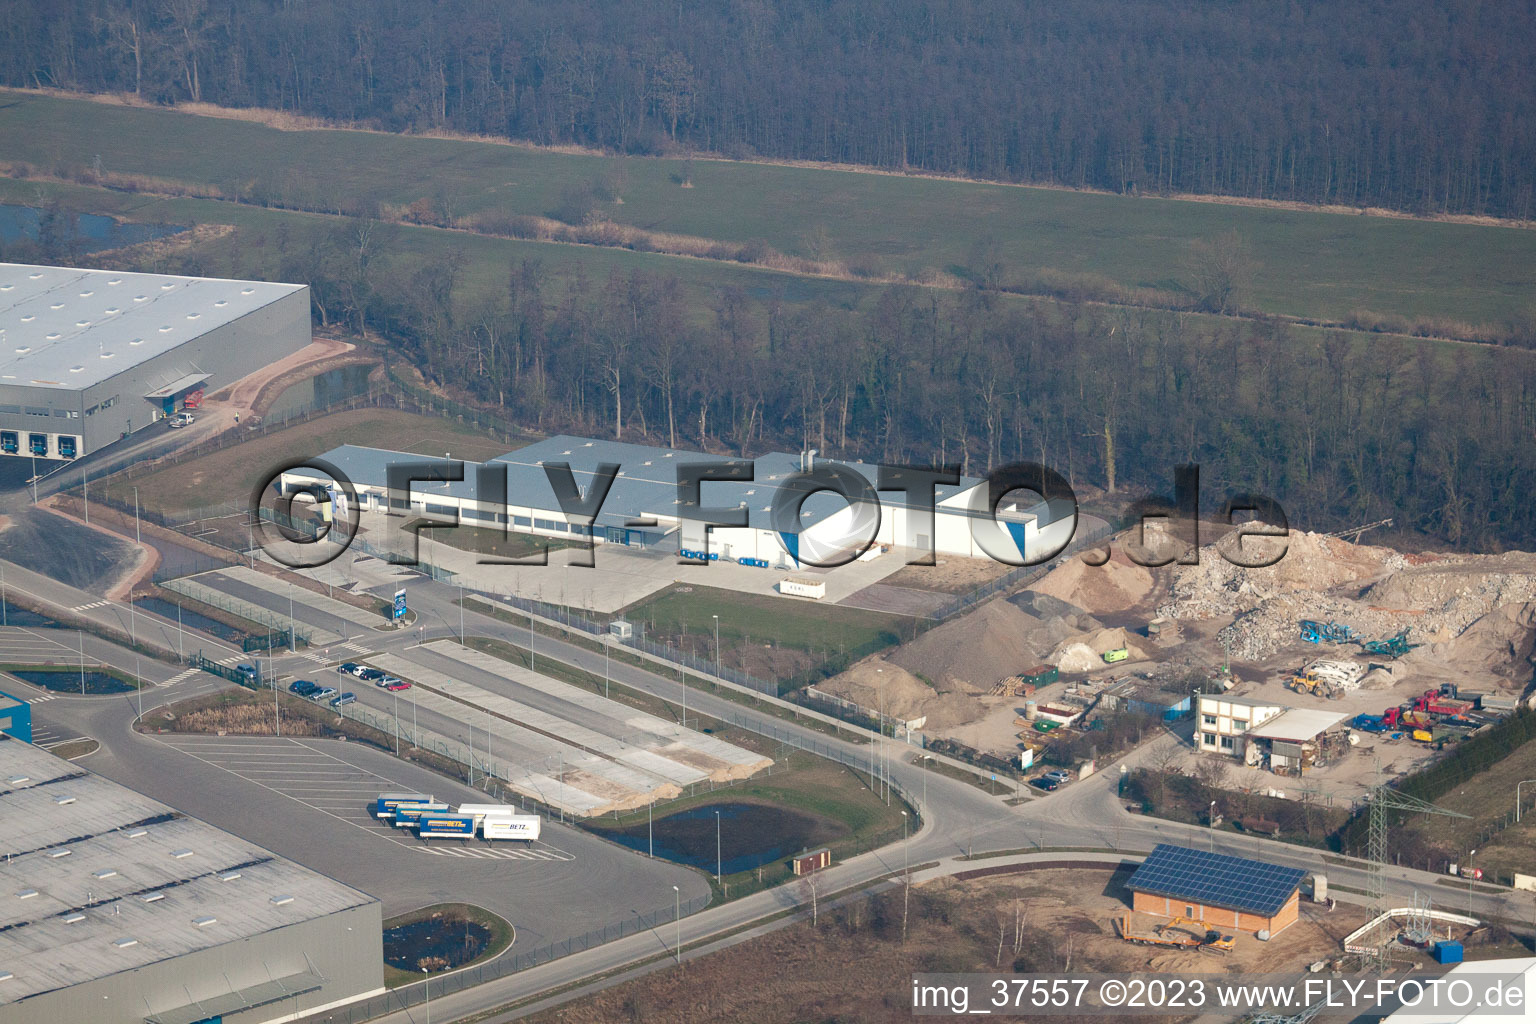 Aerial view of Horst industrial area in the district Minderslachen in Kandel in the state Rhineland-Palatinate, Germany